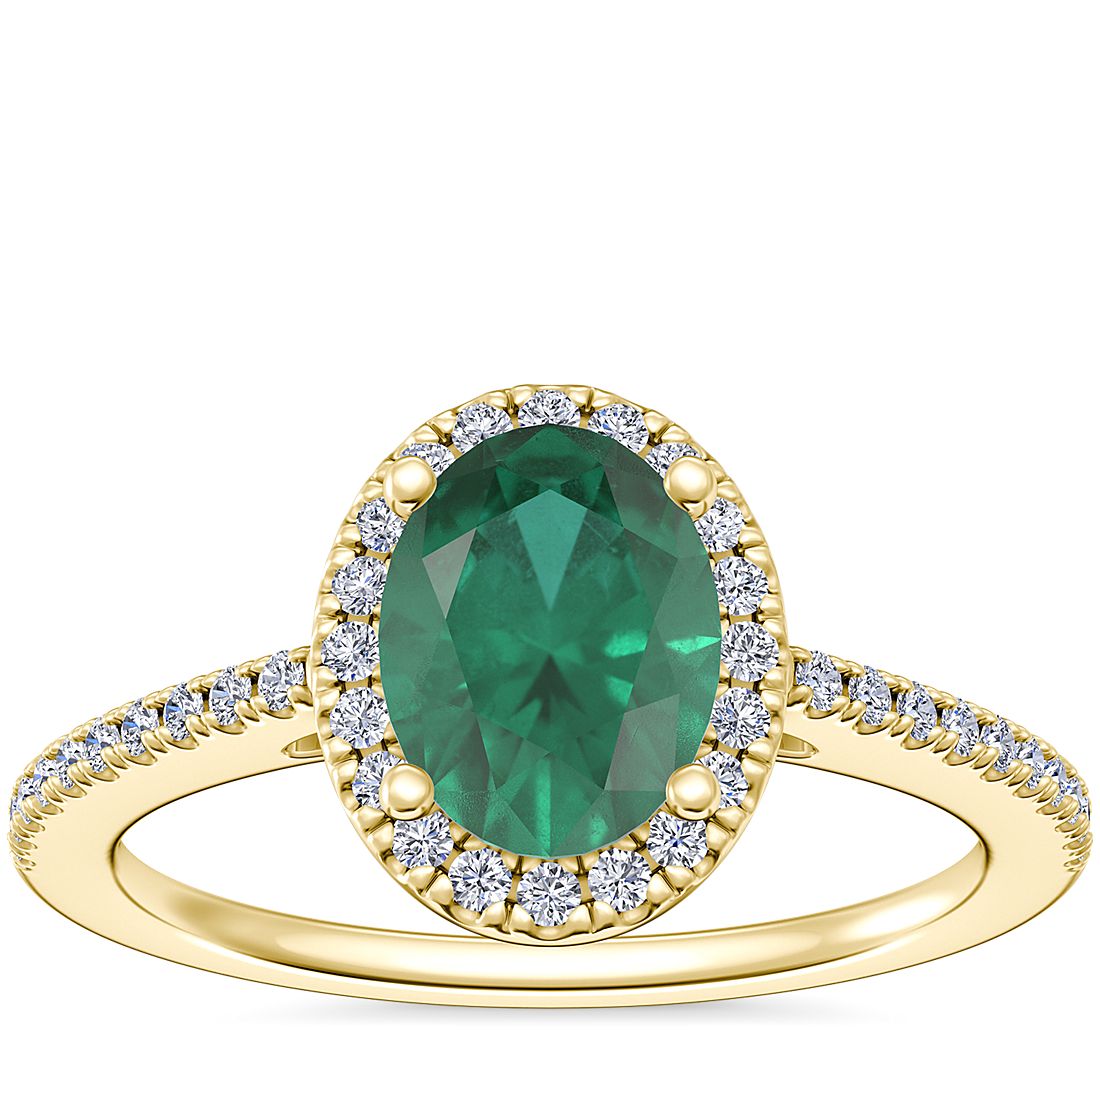 Classic Halo Diamond Engagement Ring with Oval Emerald in 14k Yellow Gold (8x6mm)